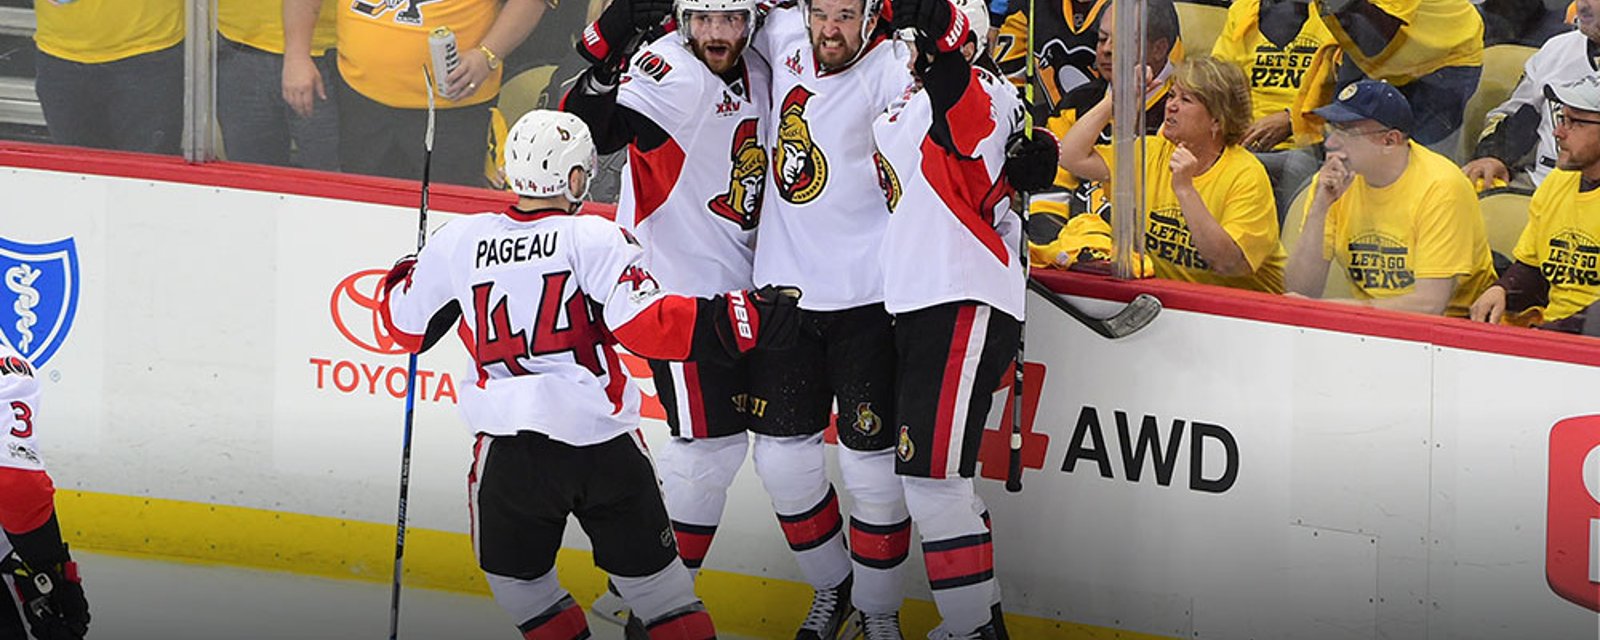 Breaking: Sens forced to leave 3 critical players exposed